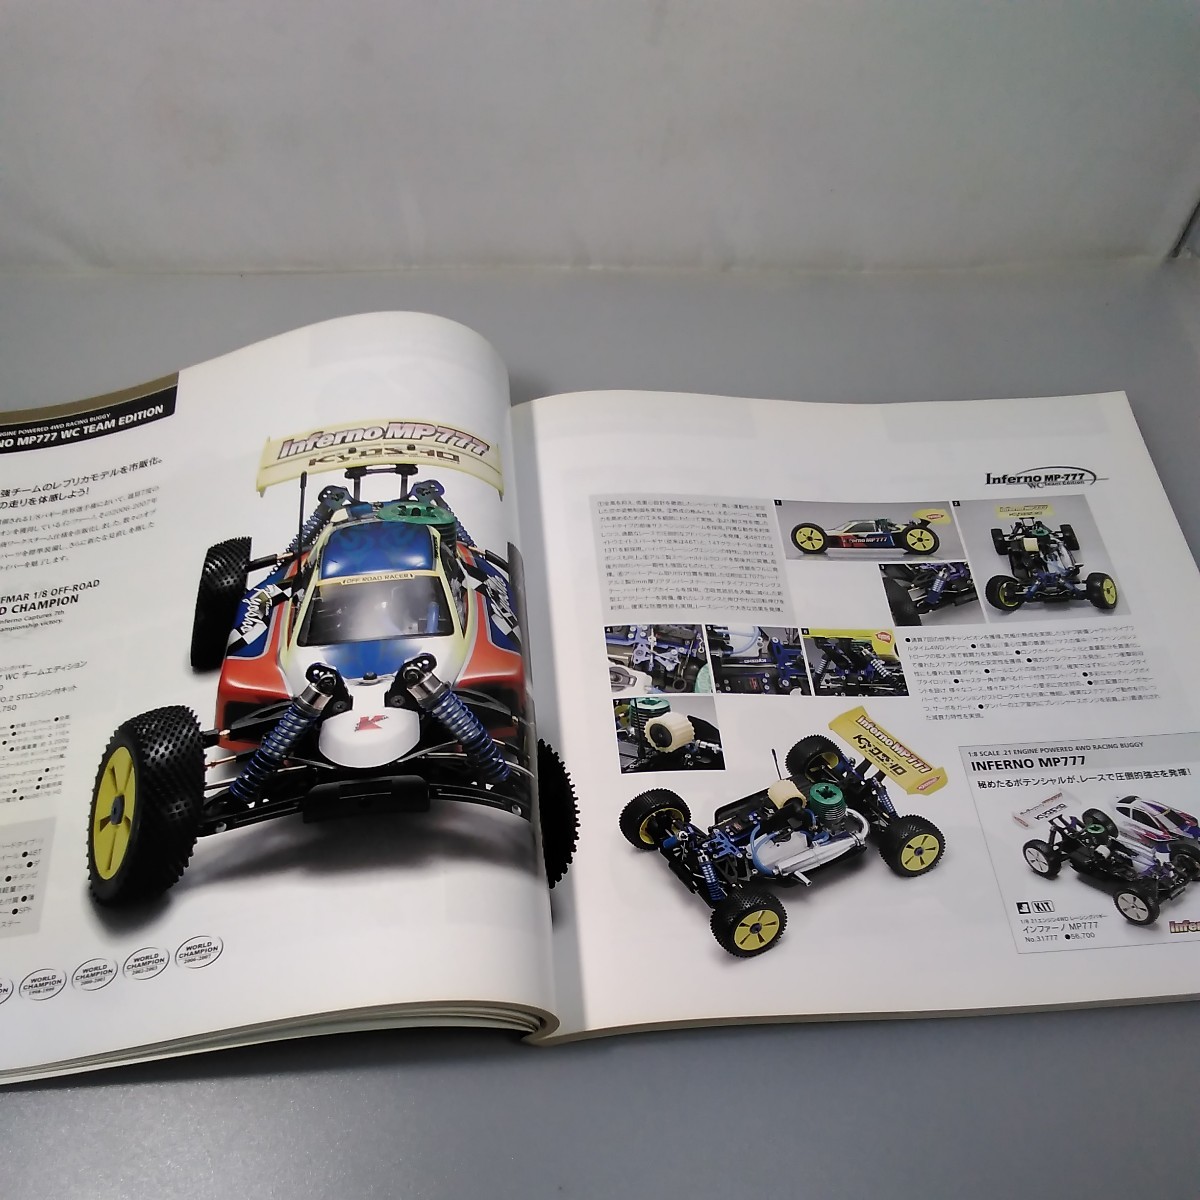  that time thing *KYOSHO*\'08 CATALOG AND HANDBOOK* Kyosho radio-controller catalog 2008 year *THE FINEST RADIO CONTROLLED MODELS* free shipping * rare * immediately shipping 